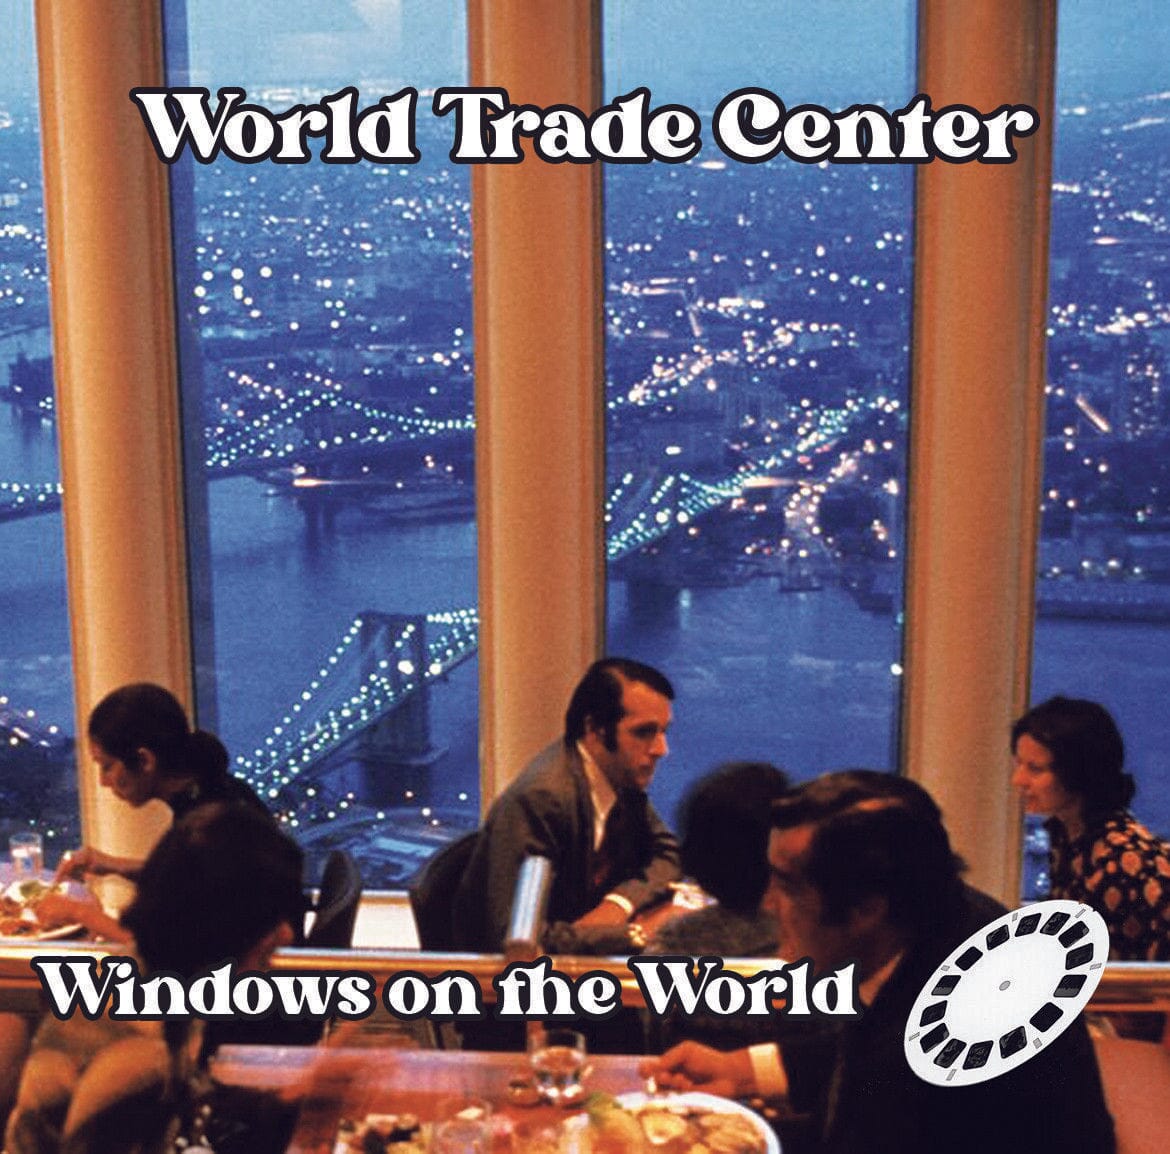 Windows on the World - WORLD TRADE CENTER - ViewMaster Commercial Reel